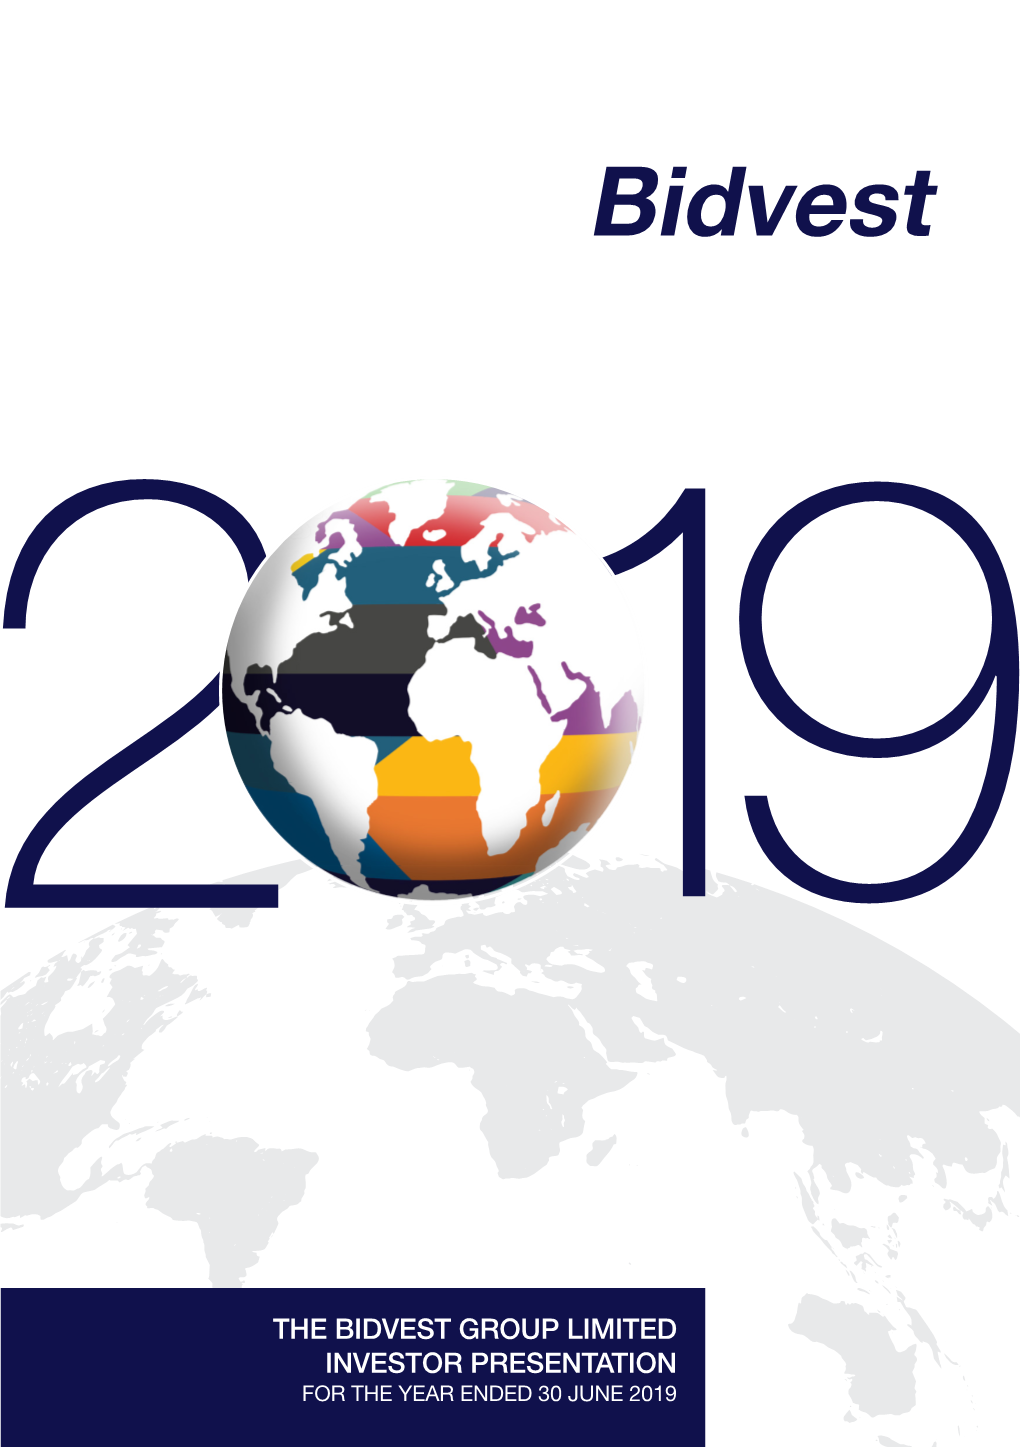 THE BIDVEST GROUP LIMITED INVESTOR PRESENTATION for the YEAR ENDED 30 JUNE 2019 Administration